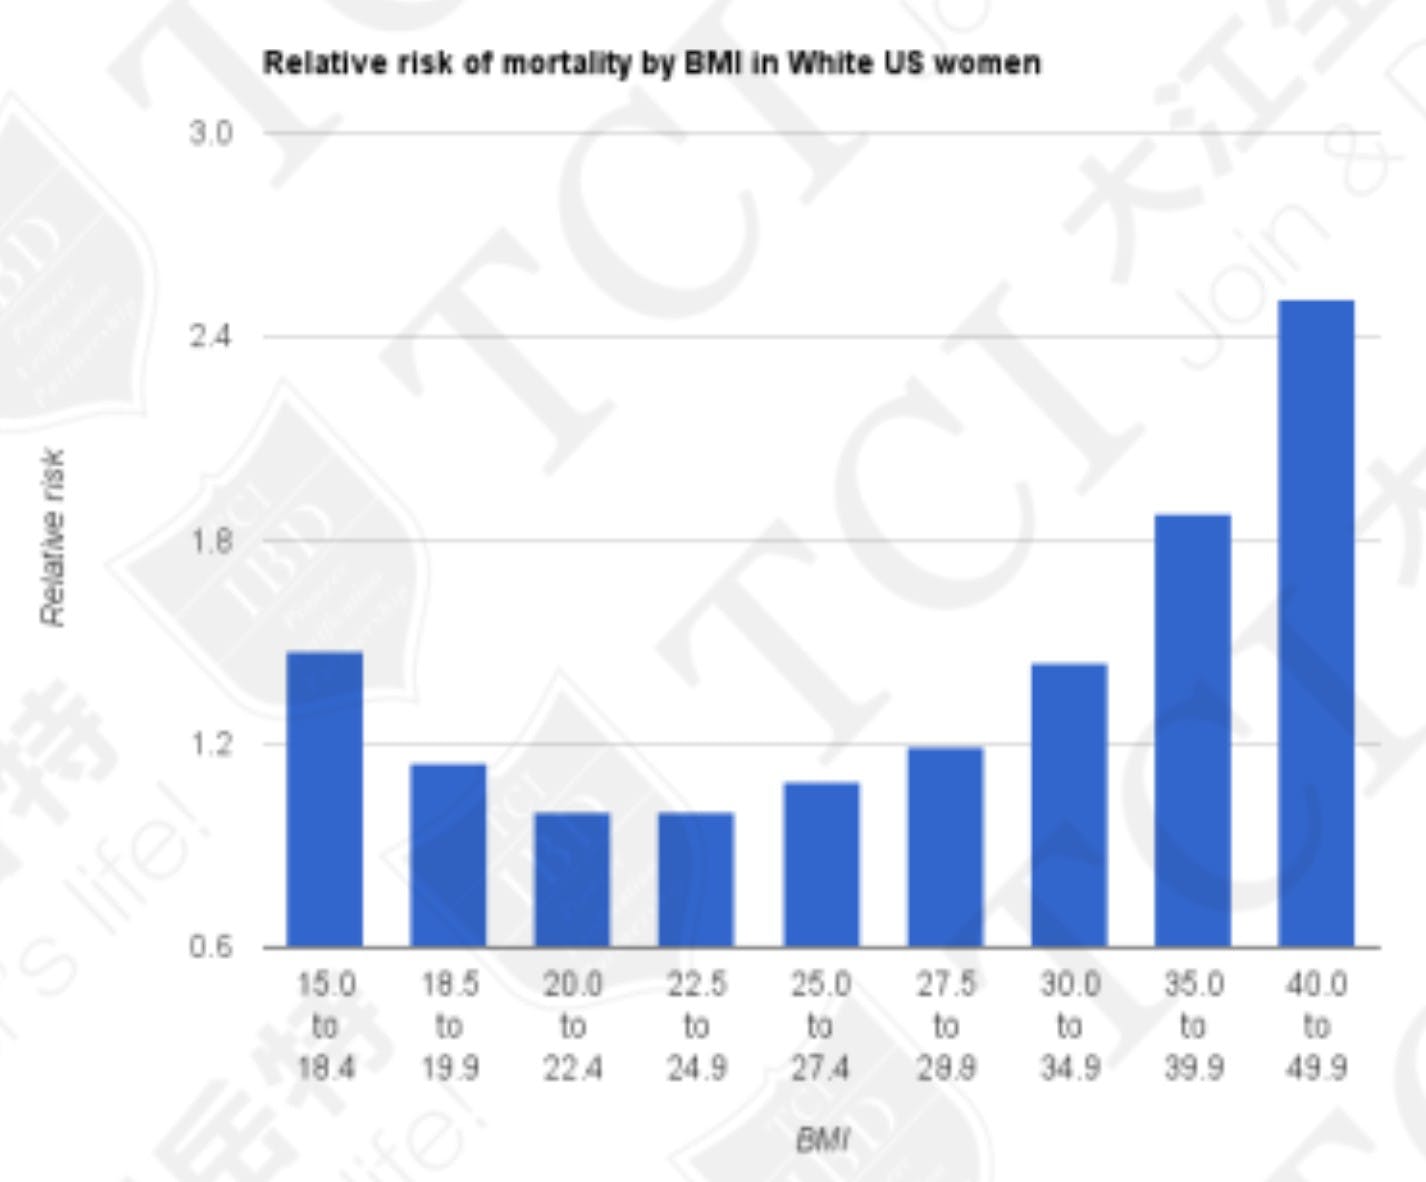 The relative risk of mortality by BMI in non-smoking US women, Data Source: Wikipedia